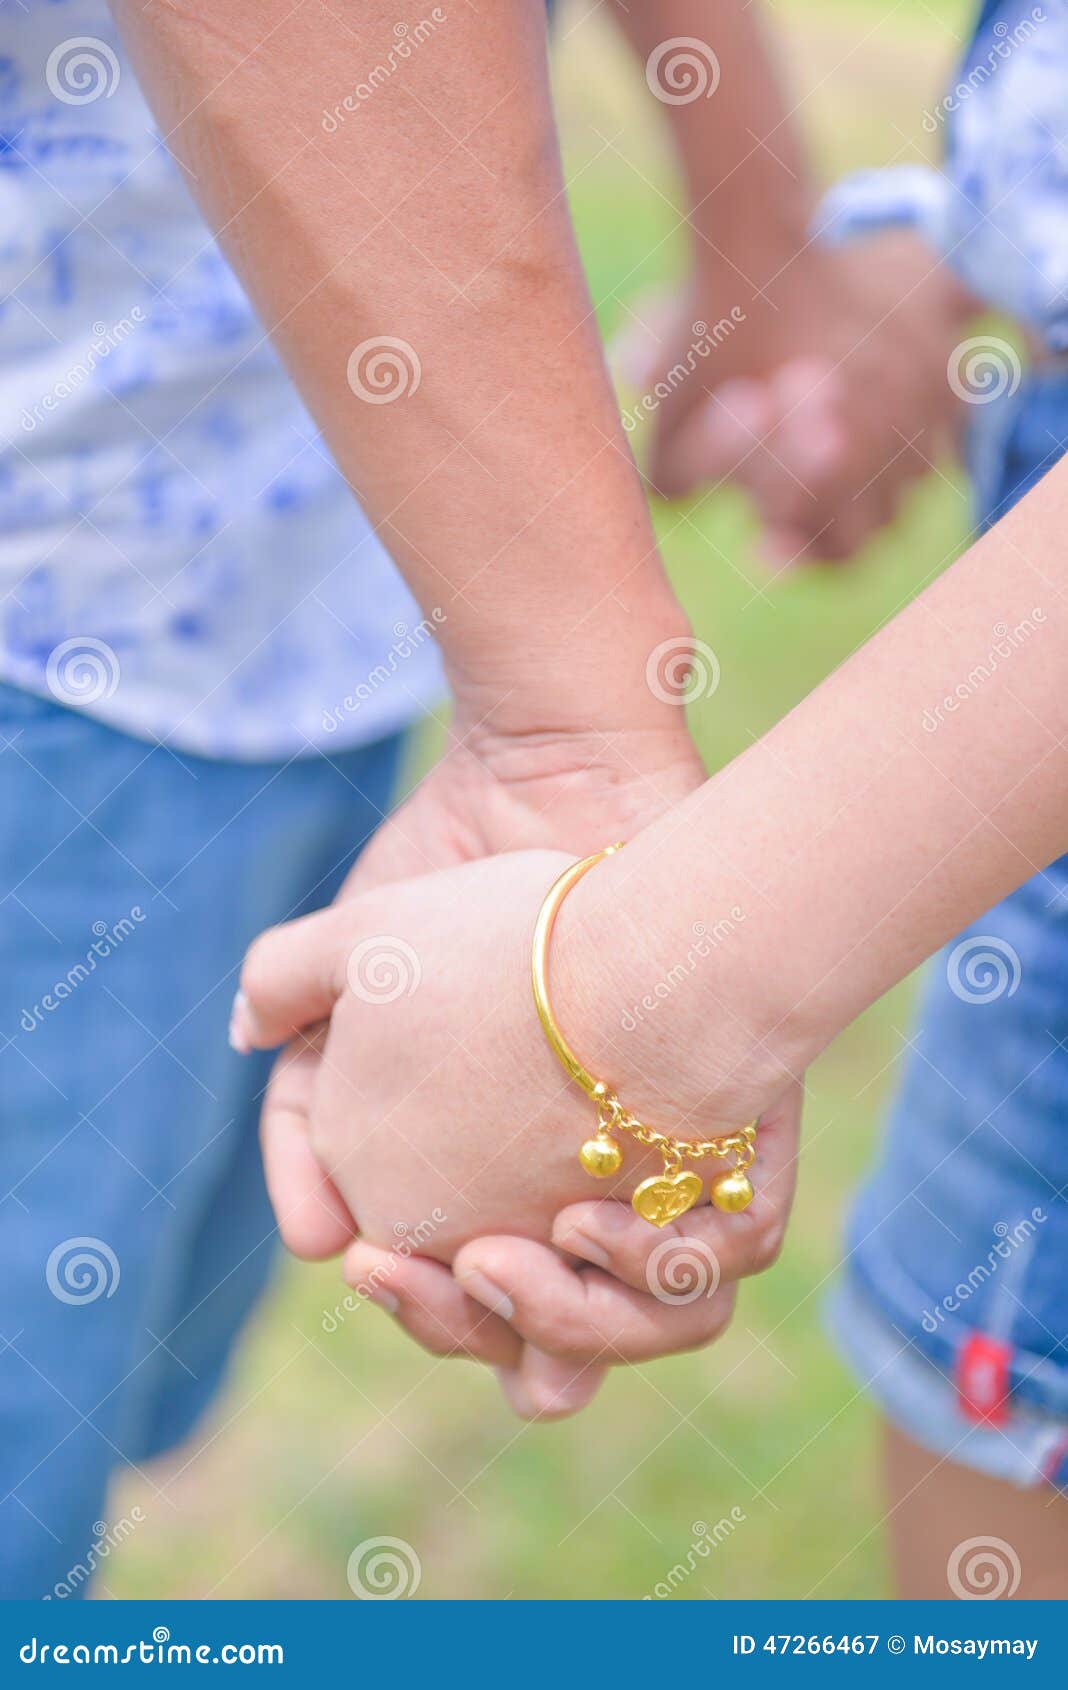 Boy and Girl Holding Hand Together Stock Image - Image of gold ...